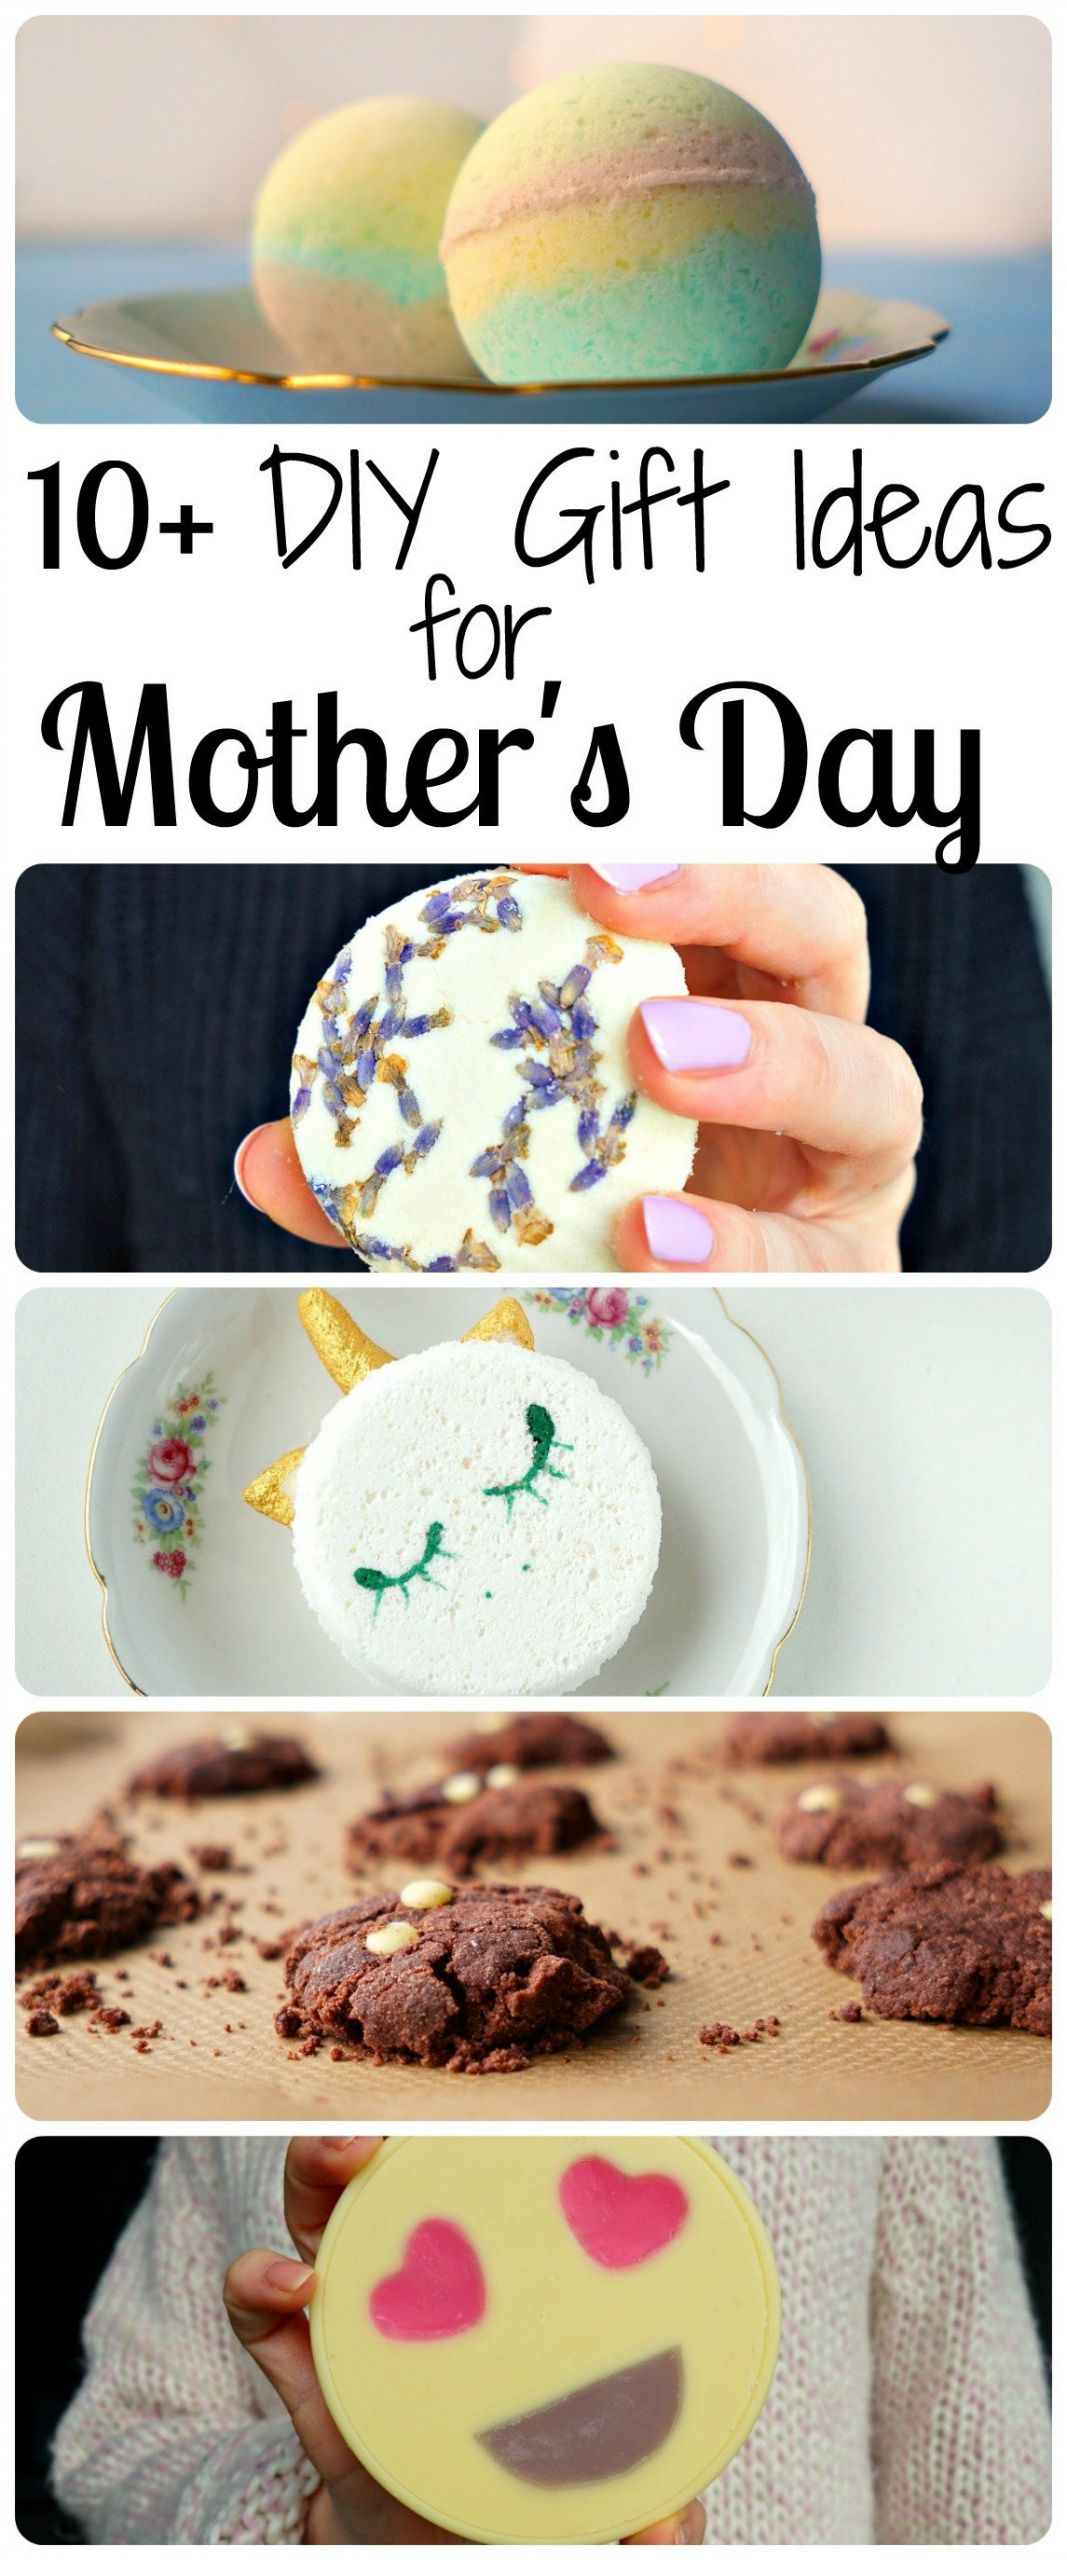 Mother'S Day Jewelry Gift Ideas
 30 Gift Ideas for Mother s Day to Buy or DIY The Makeup